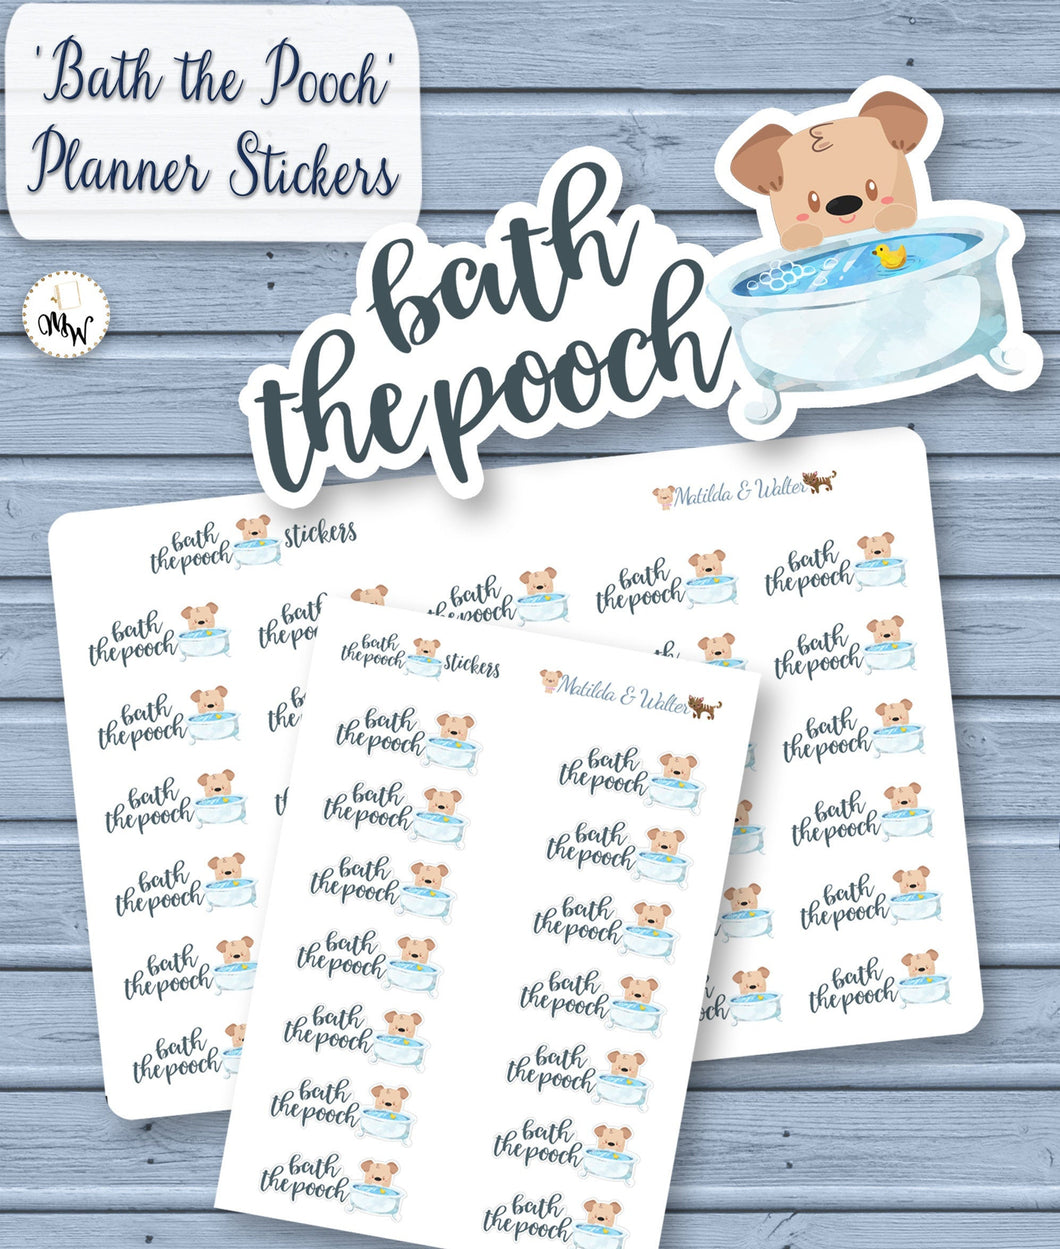 'Dogs Bathtime' Cute Stickers - mini handmade planner stickers from the Functional Art kawaii series